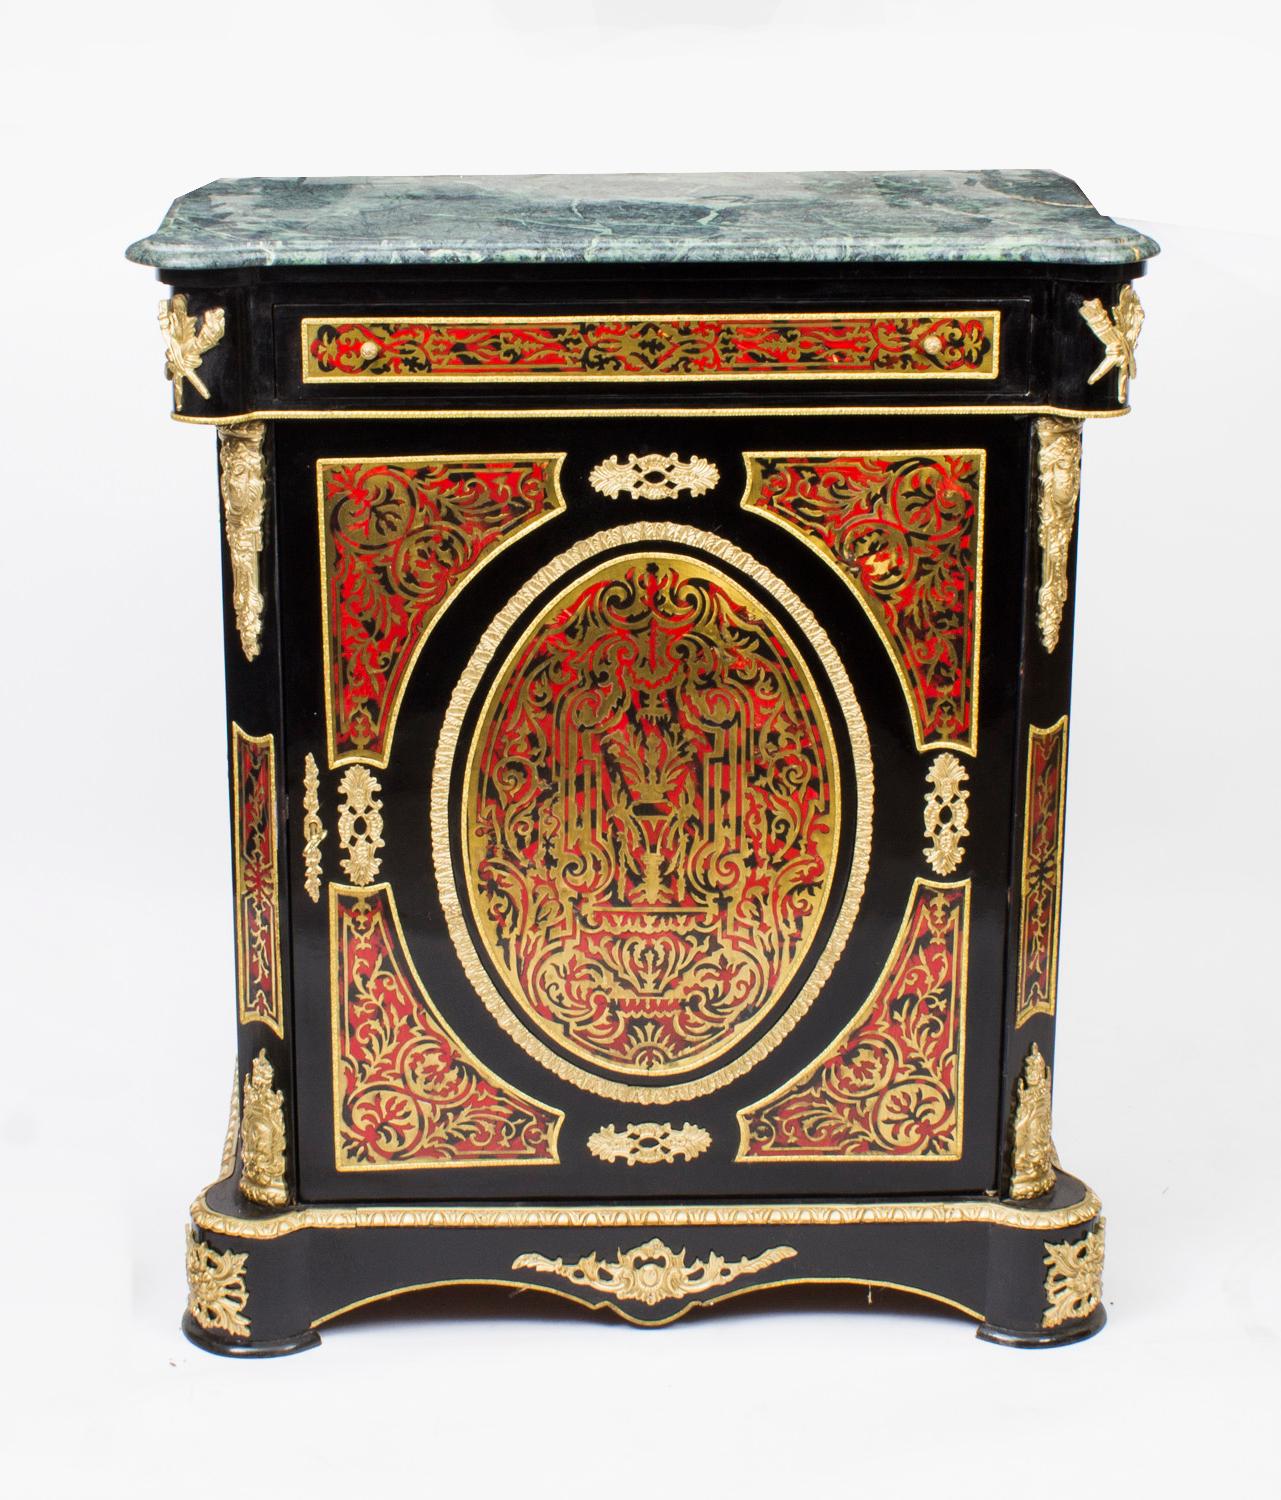 This is a stunning vintage Louis XVI style Boulle pier cabinet dating from the late 20th century.

This ornate cabinet is ebonised and decorated with cut brass inlaid Boulle with exquisite ormolu mounts and has a beautiful 